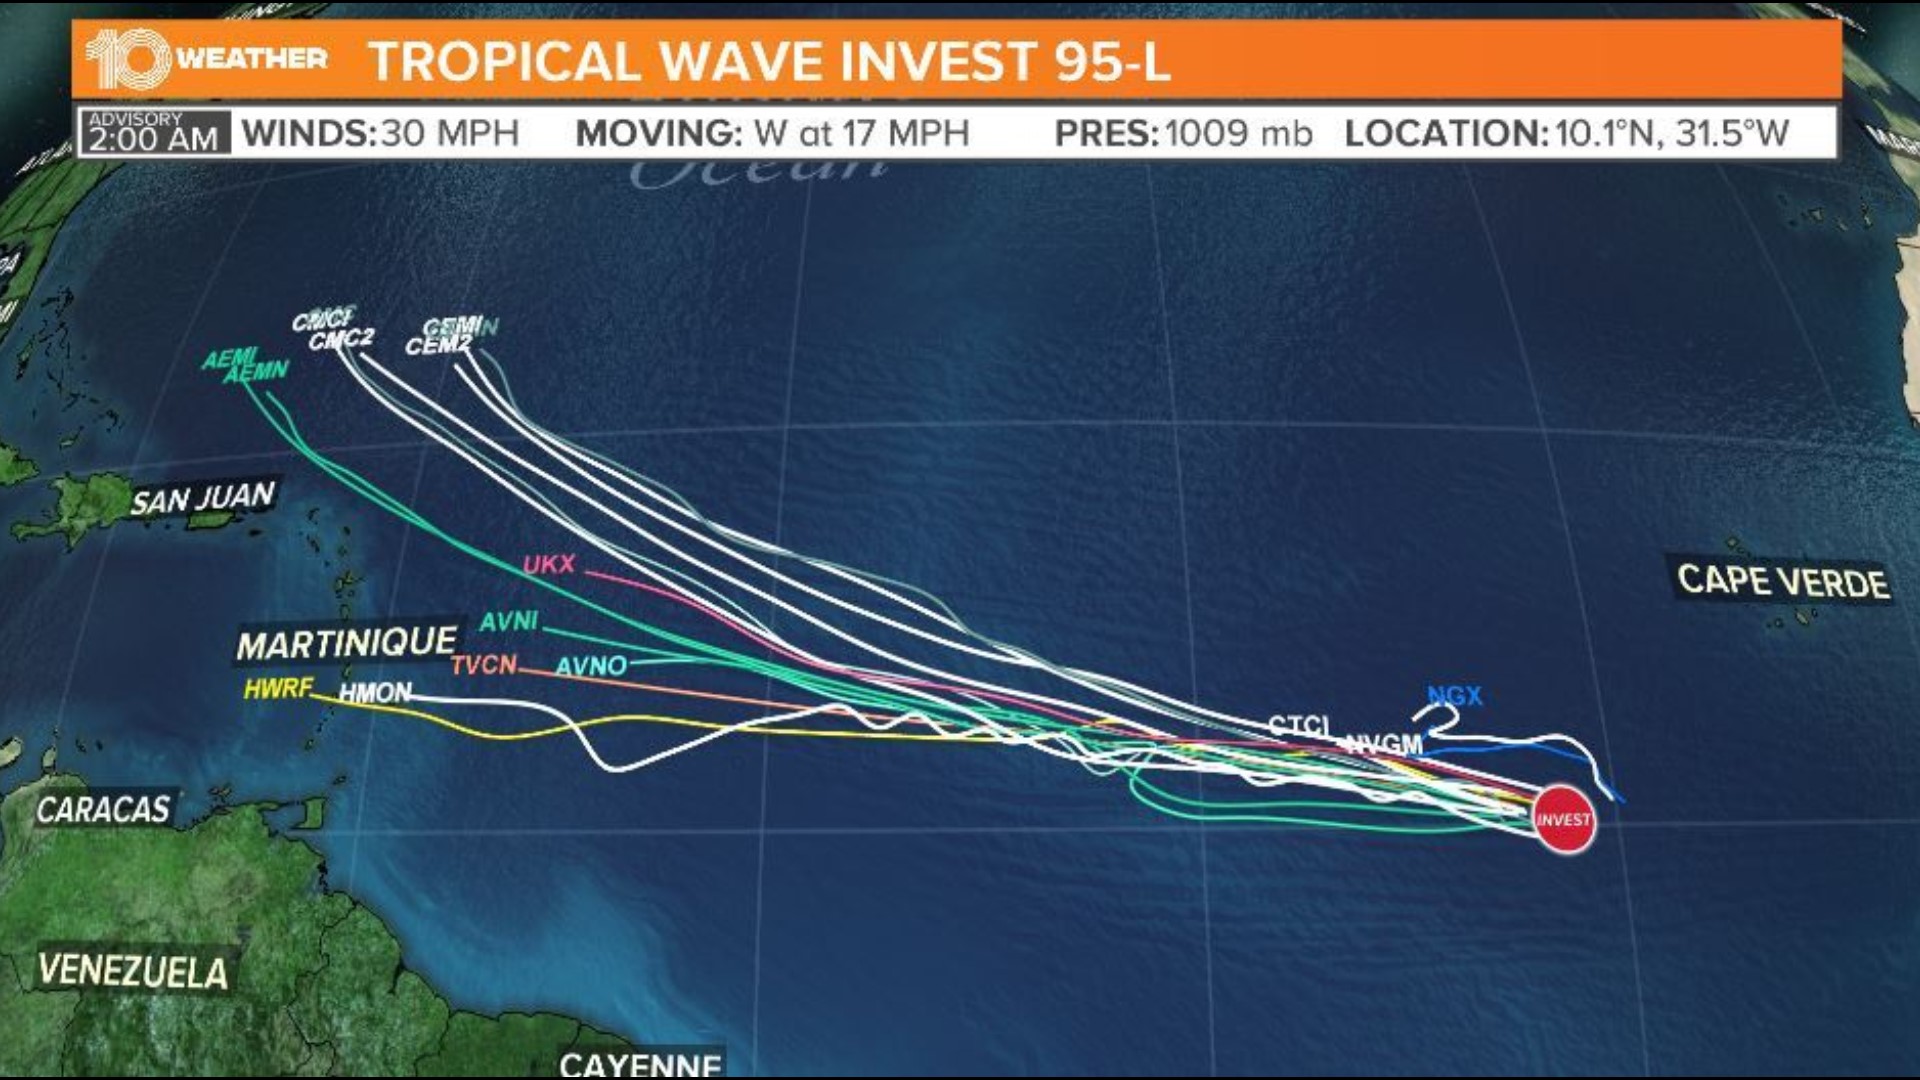 NHC tropical update 'Invest 95L' monitored in the Atlantic